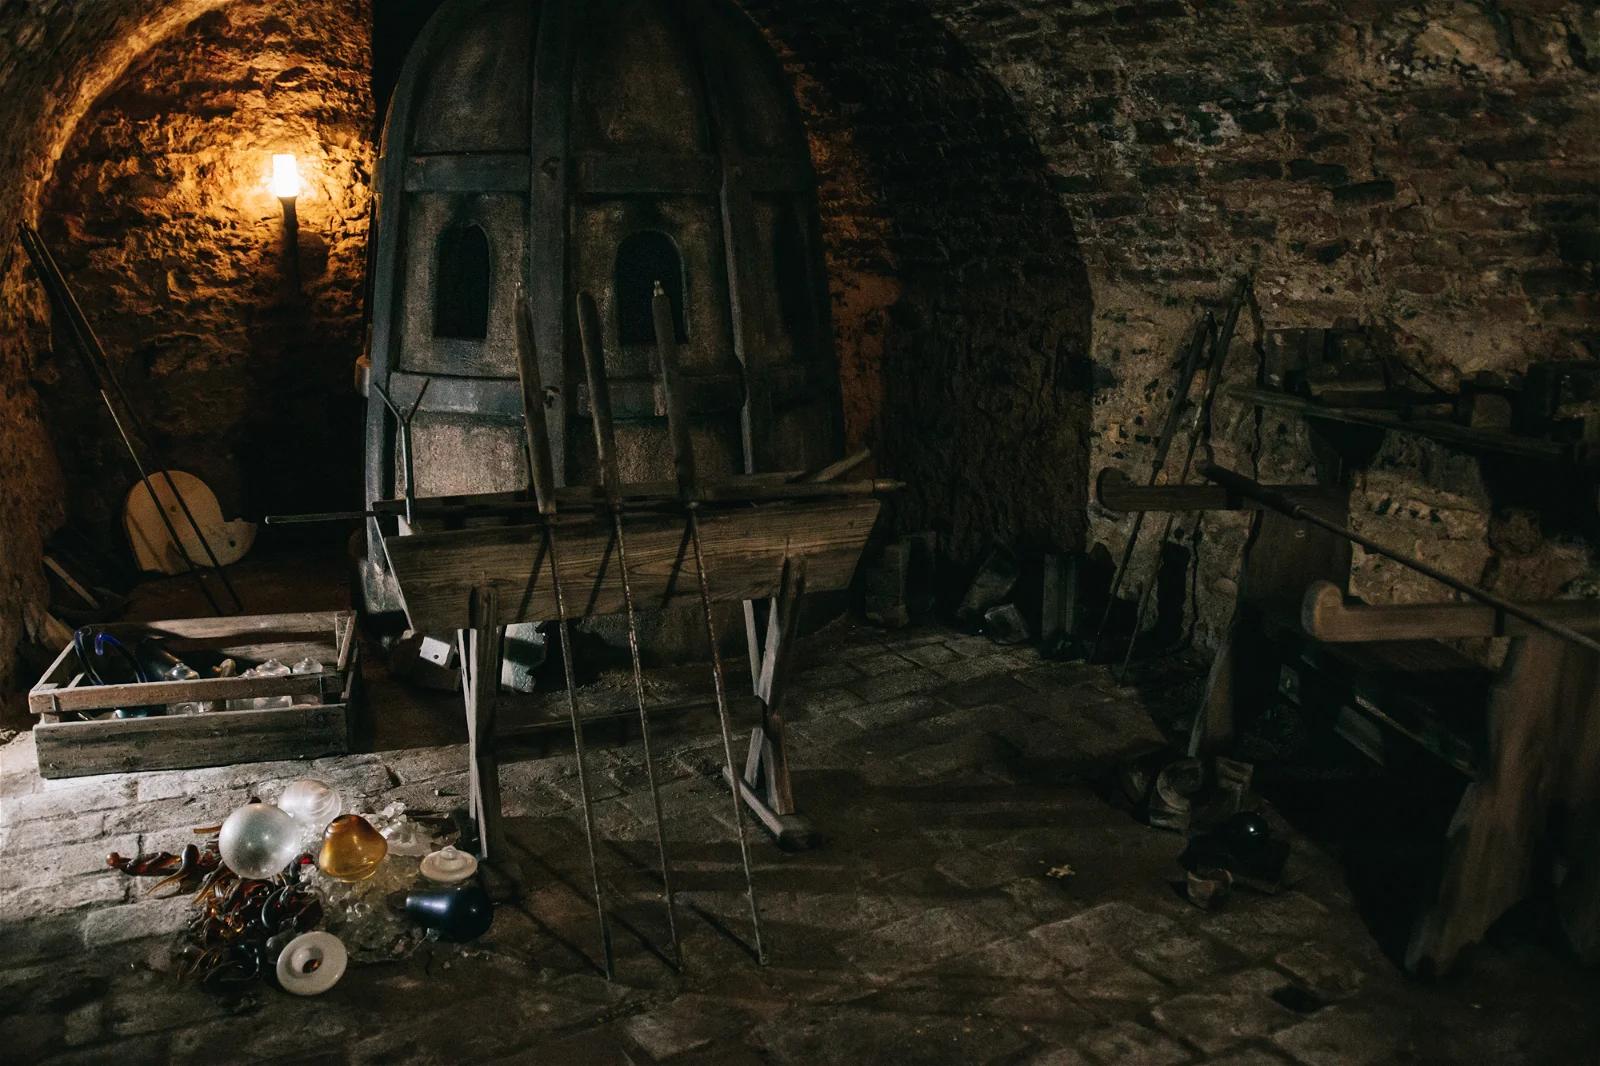 An atmospheric photo of an old, dark workshop with a brick furnace and various tools scattered around.
